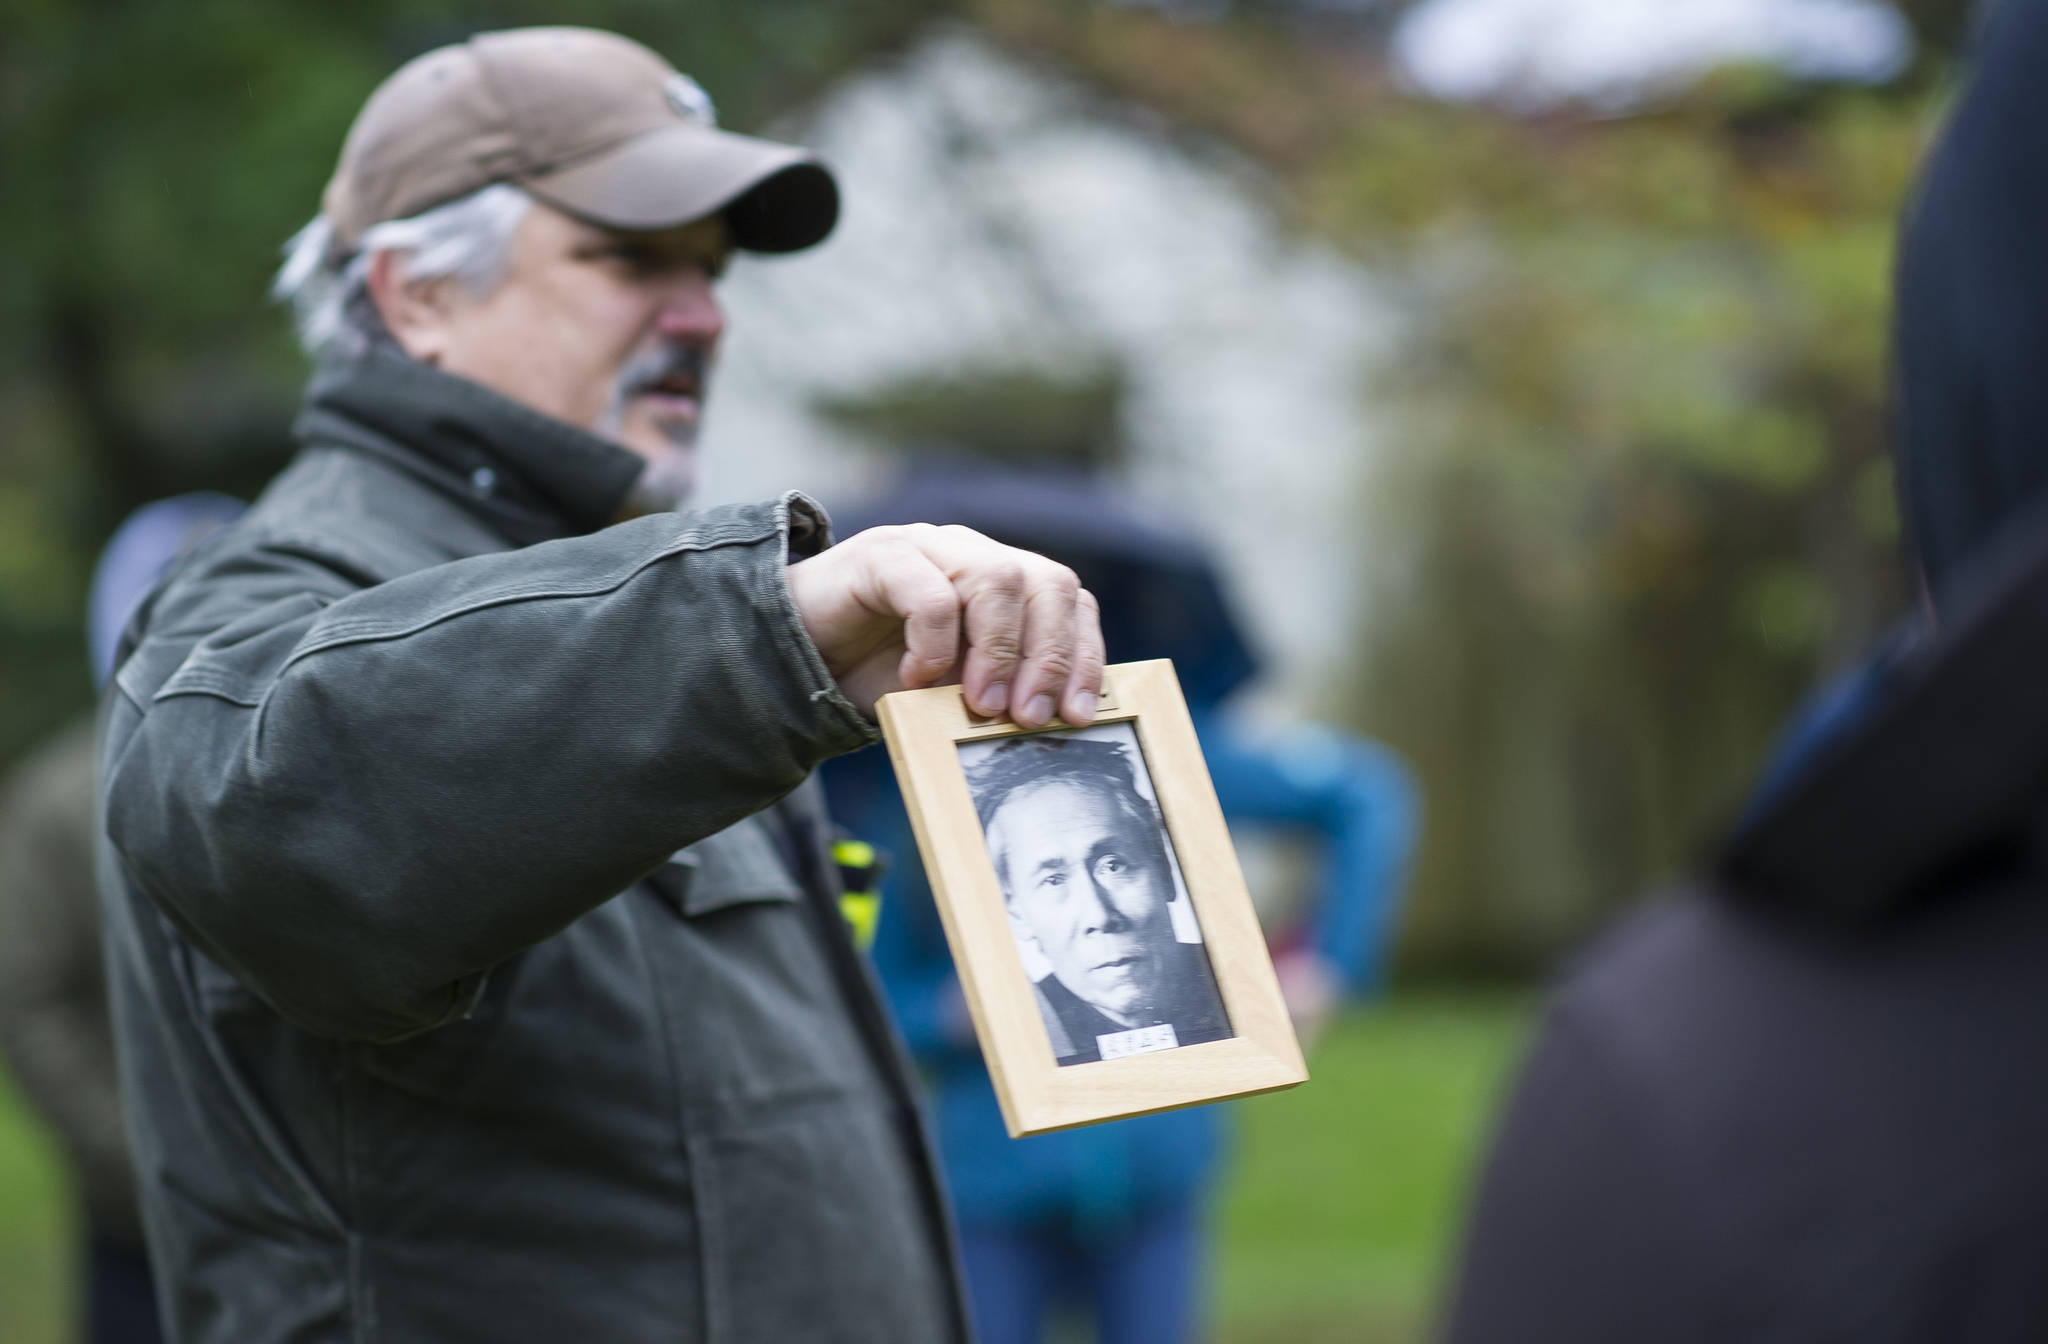 Mark Whitman gives a talk about Hi Chung, also known as “China Joe”, during a tour of Evergreen Cemetery by as part of an intensive course on Alaskan history for Yaa&